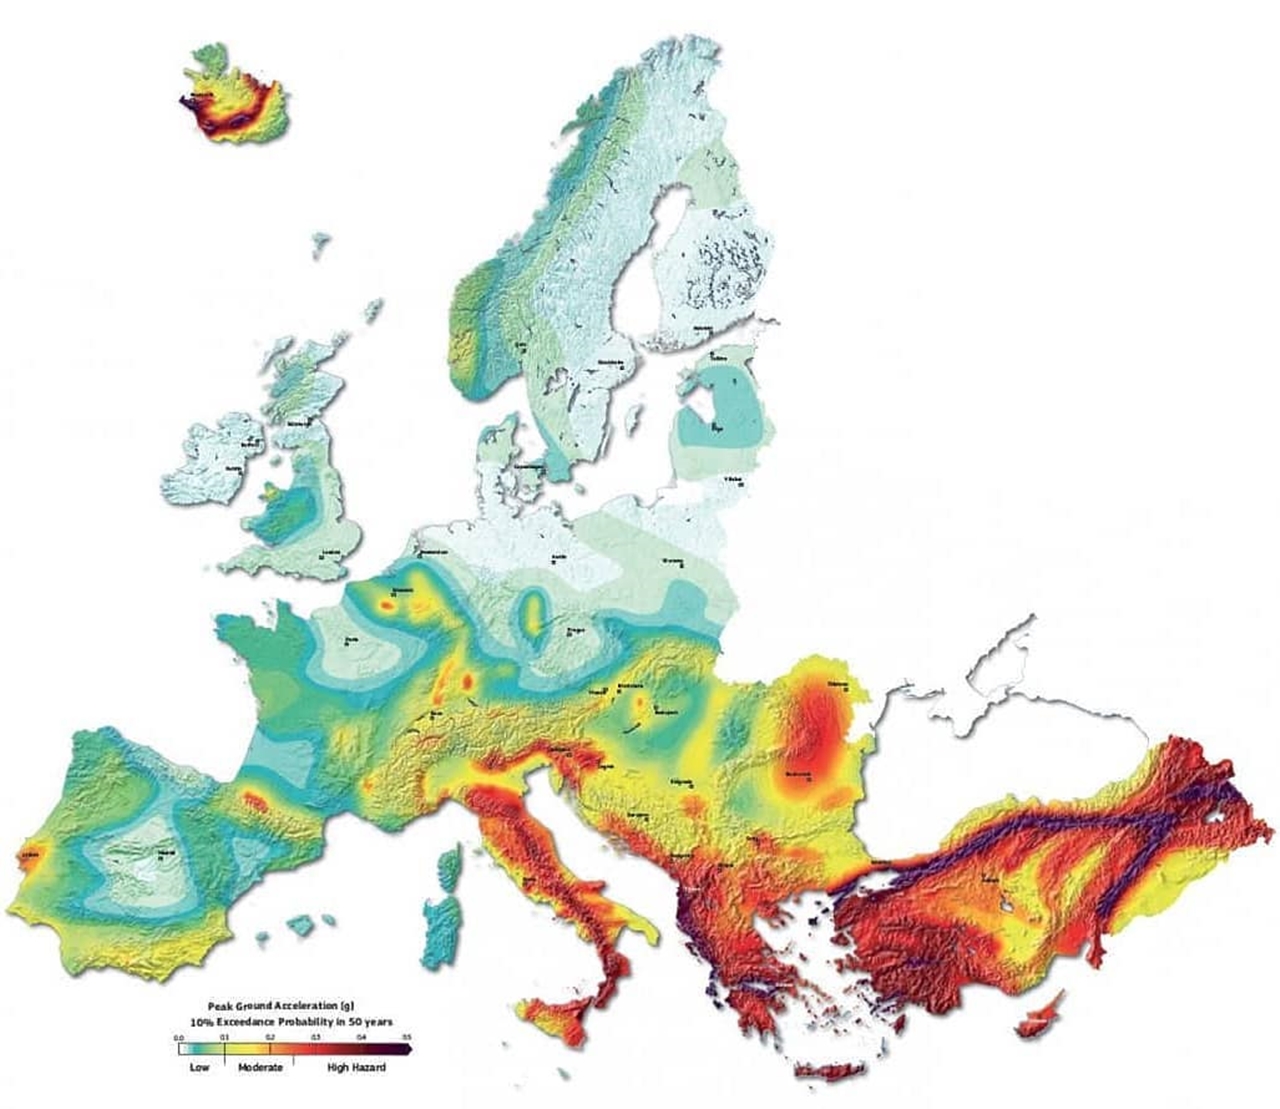 Europe fault map